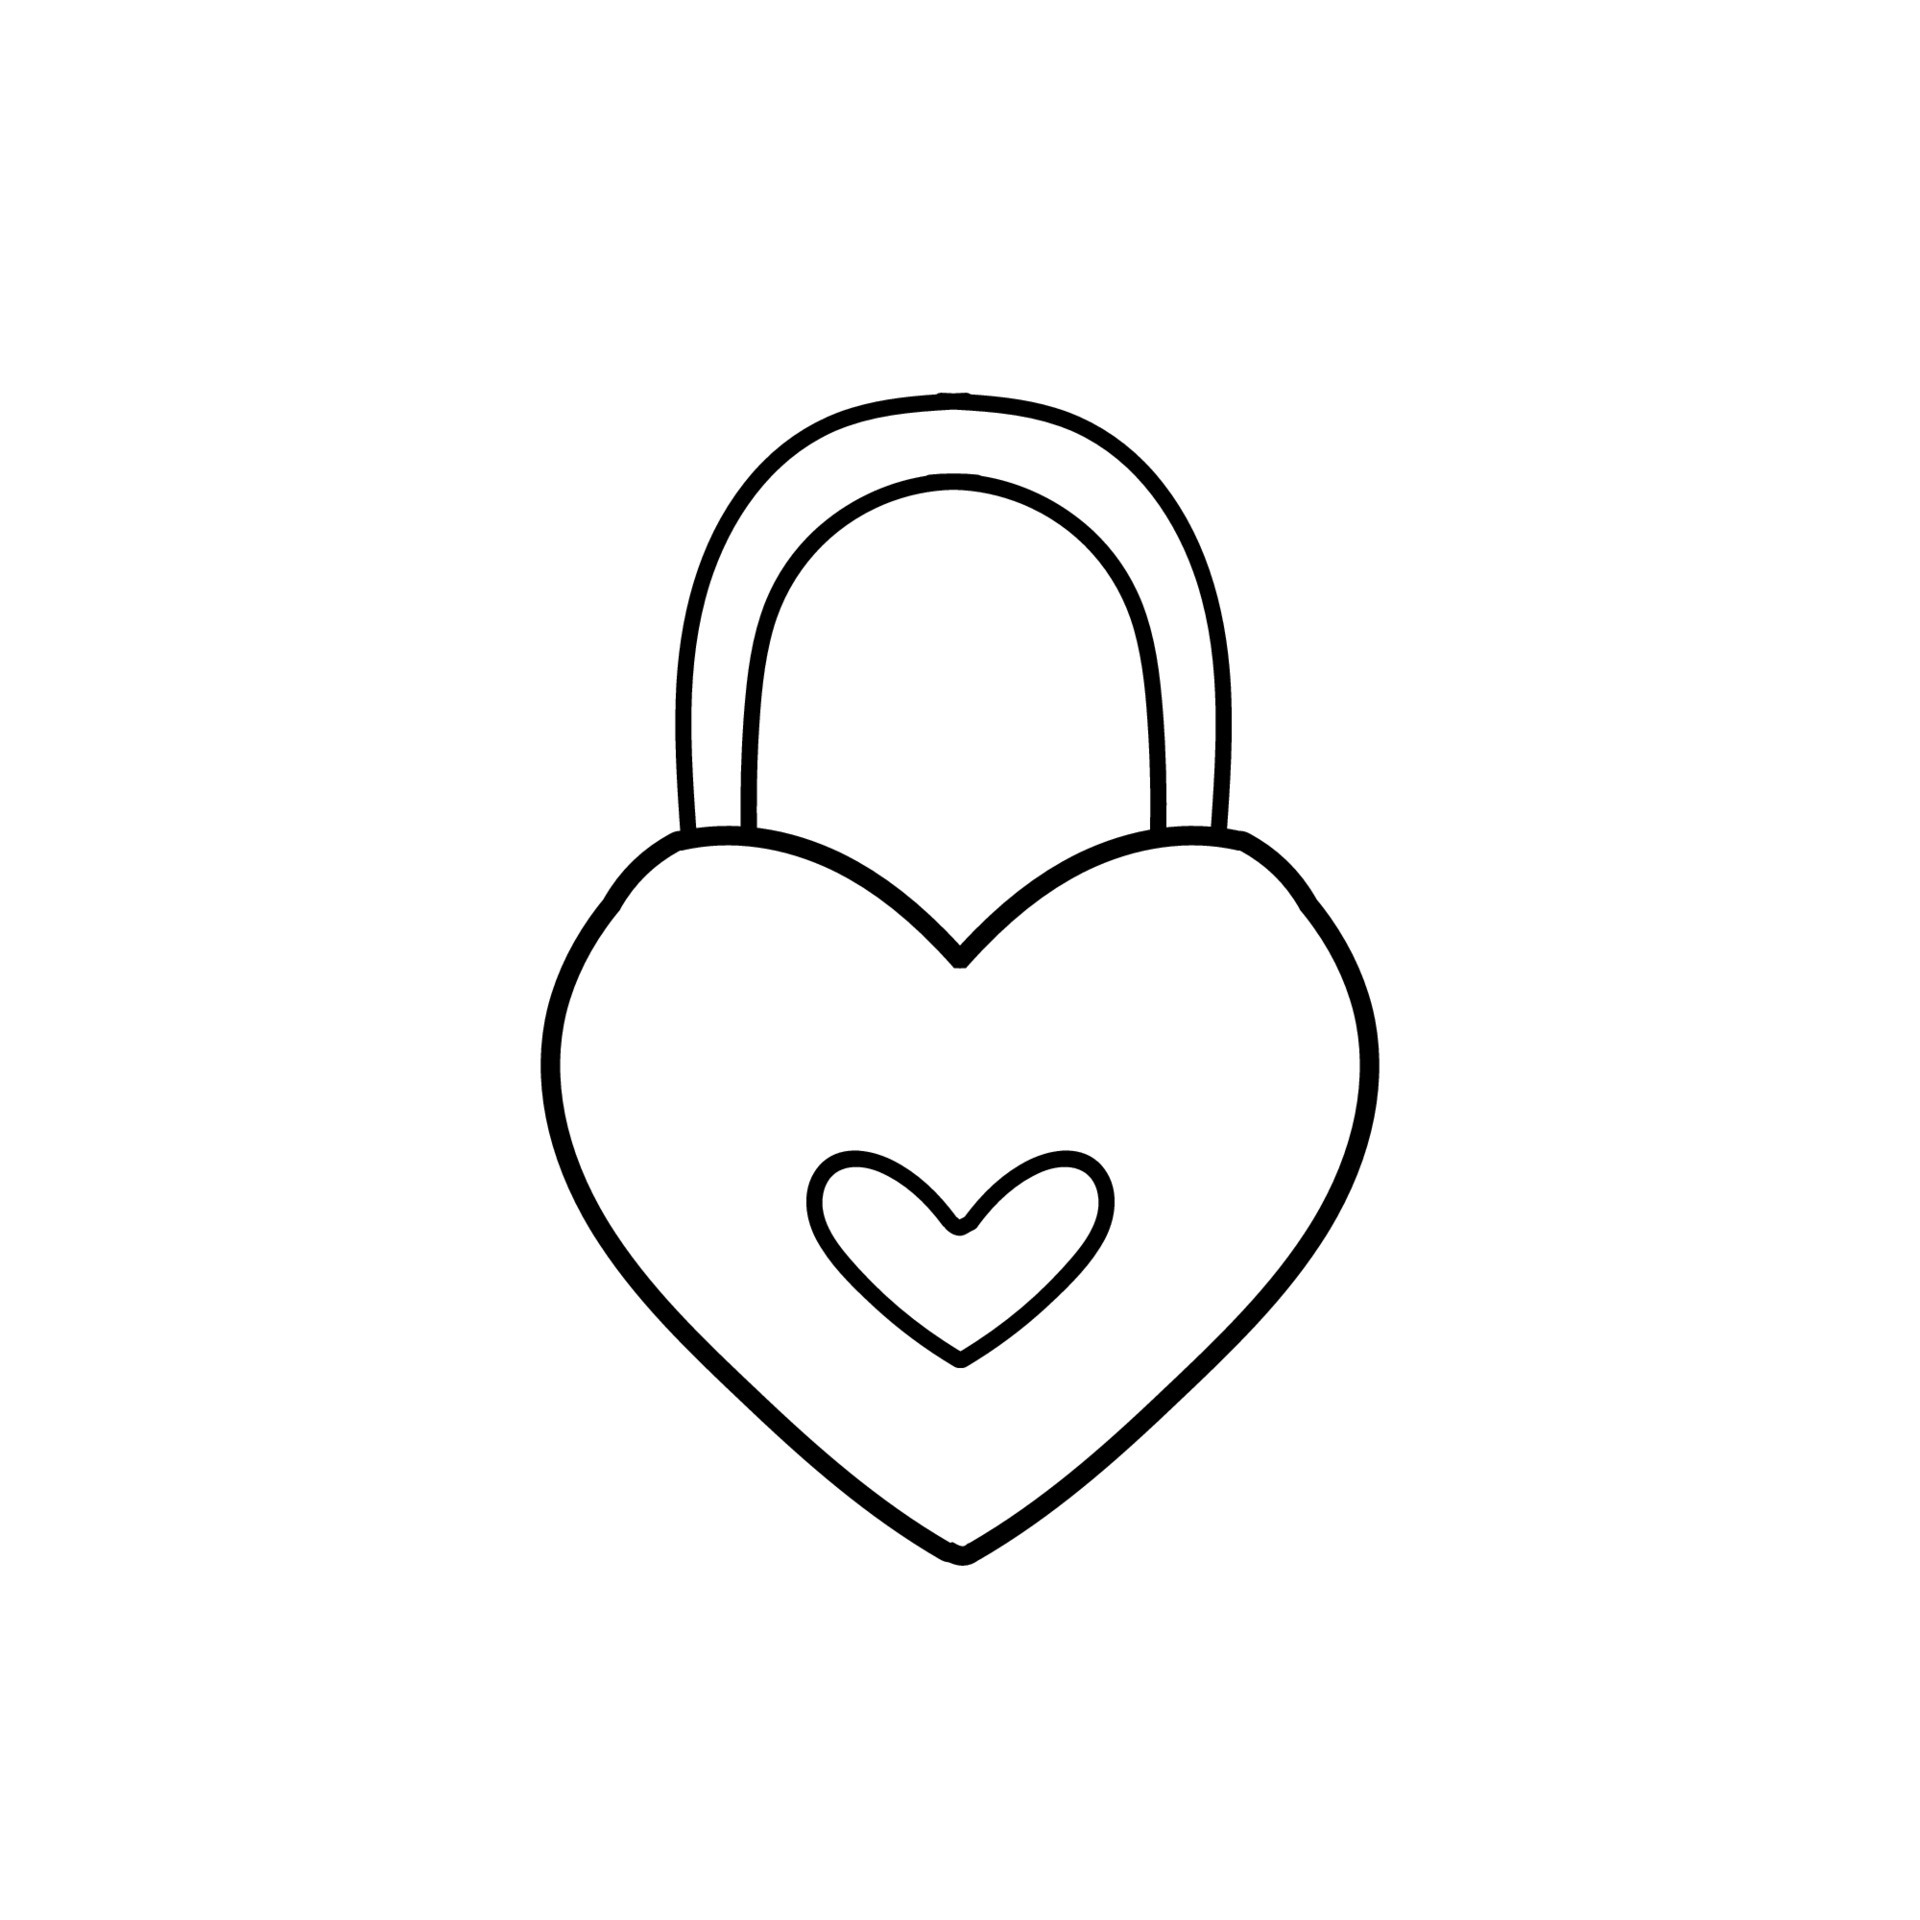 Padlock Drawing  How To Draw A Padlock Step By Step